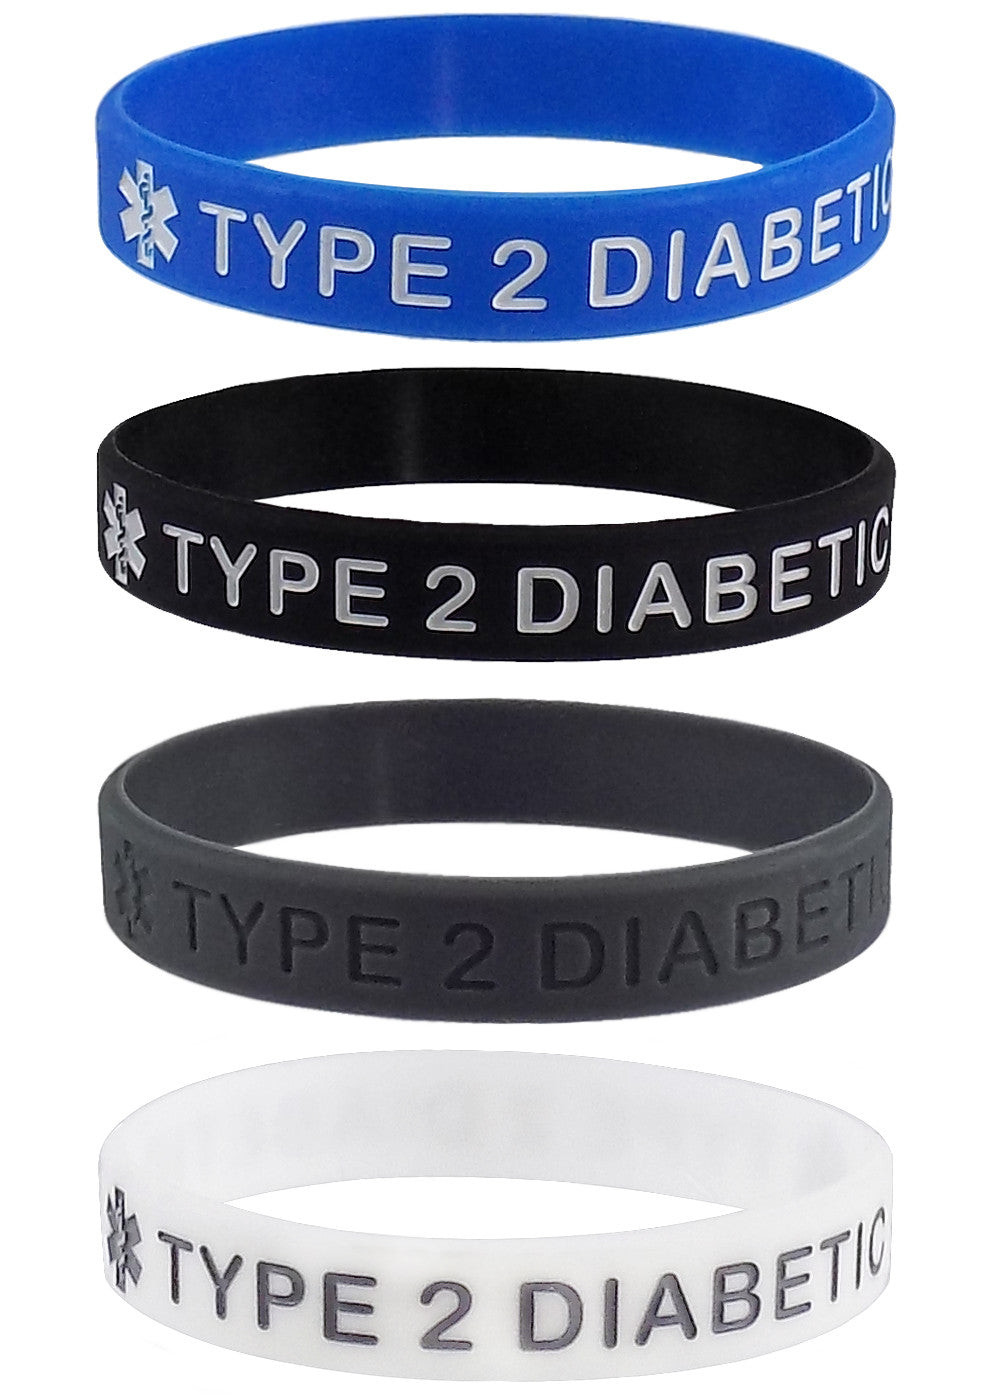 Extra Large "TYPE 2 DIABETIC" Medical Alert ID Silicone Bracelet Wristbands 4 Pack Black, Blue, Grey and White